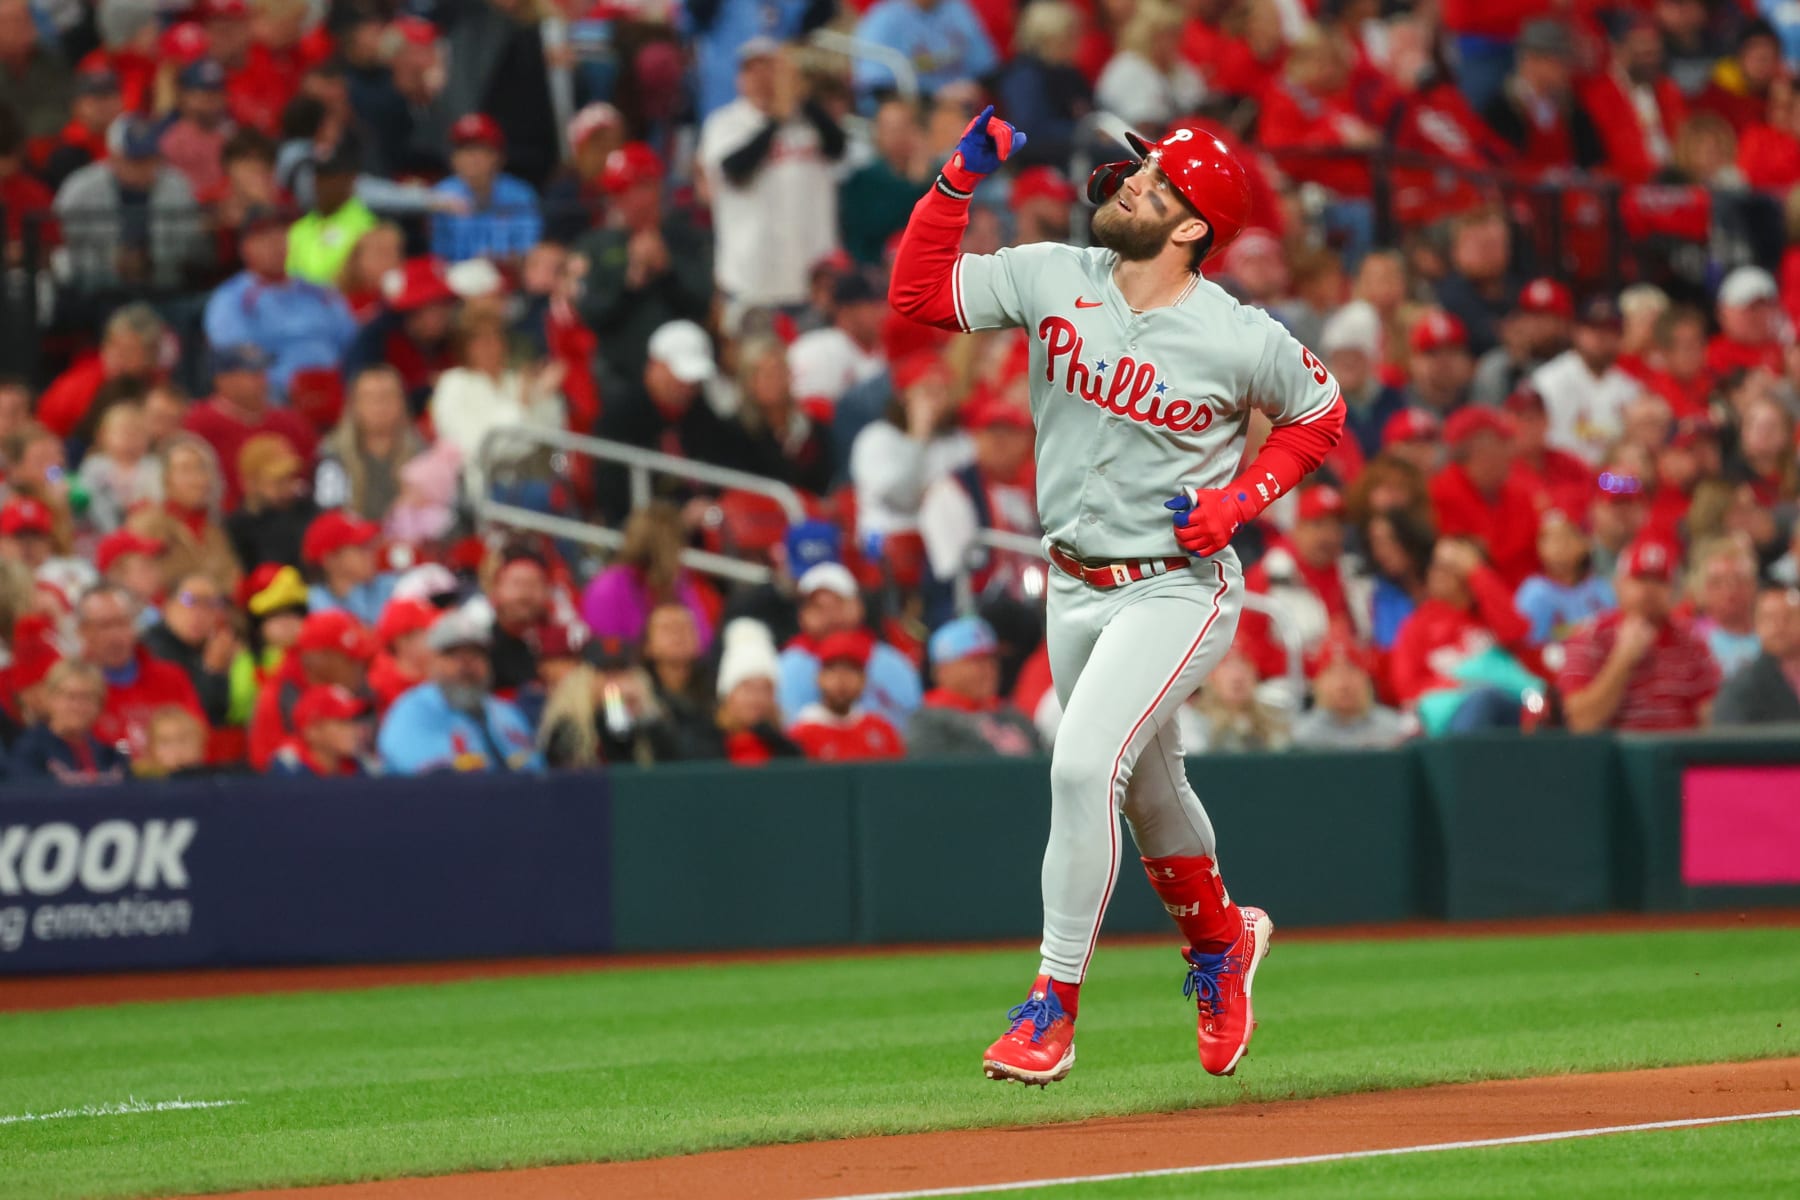 Phillies Game Today: Phillies vs Nationals Lineup, Odds